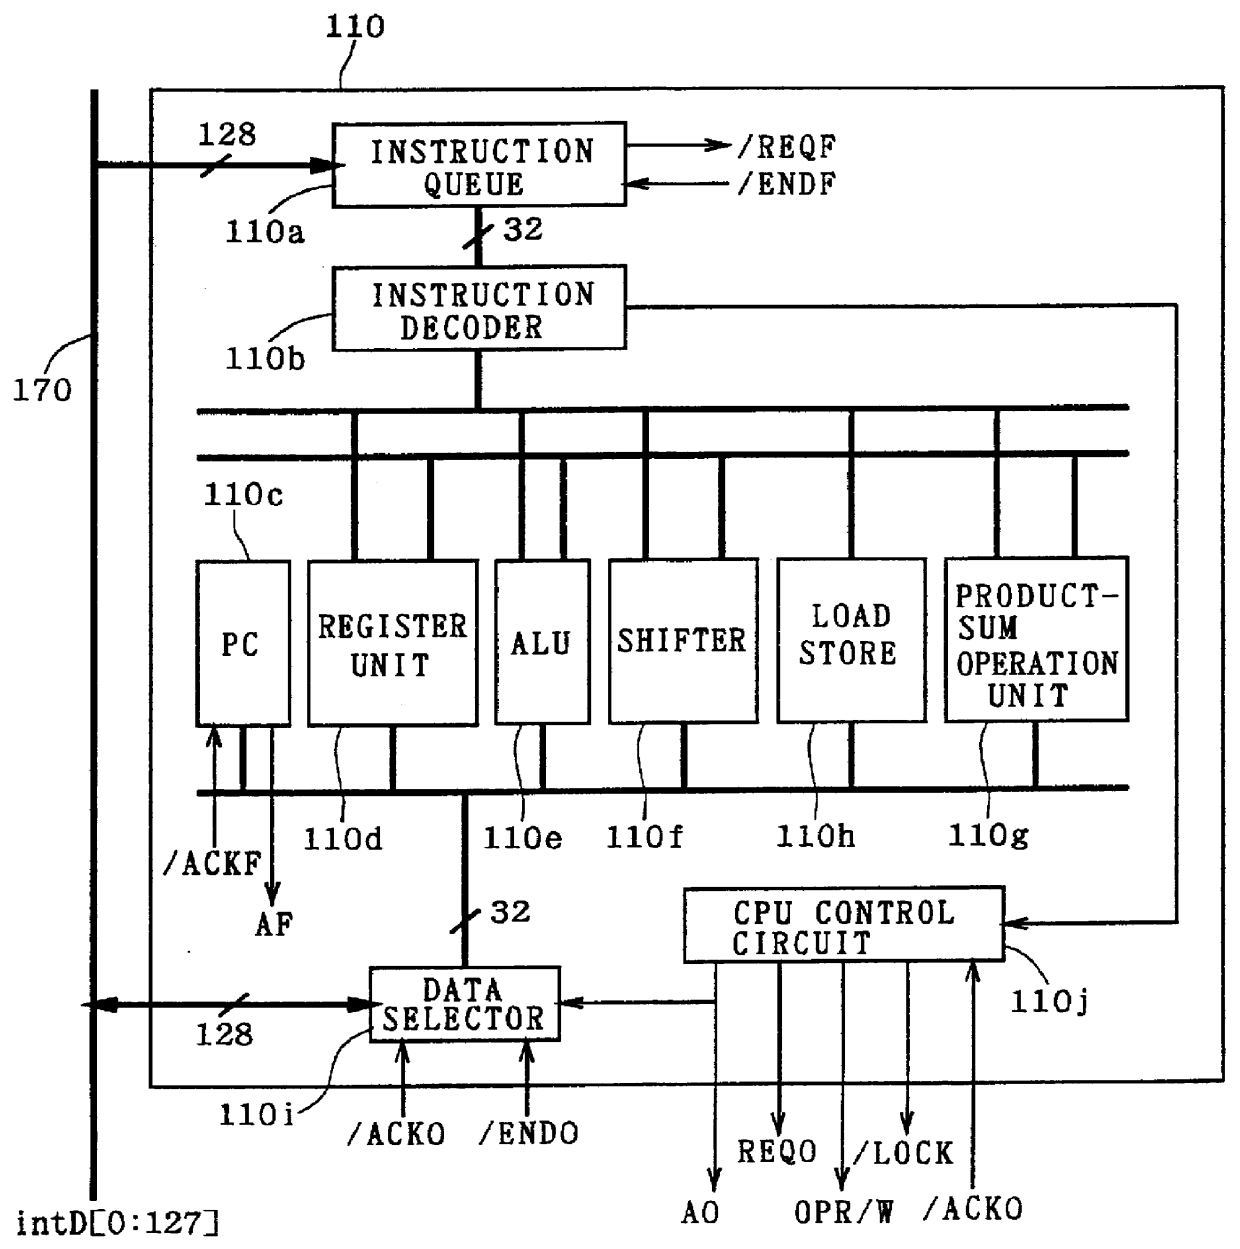 Computer system and semiconductor device on one chip including a memory and central processing unit for making interlock access to the memory